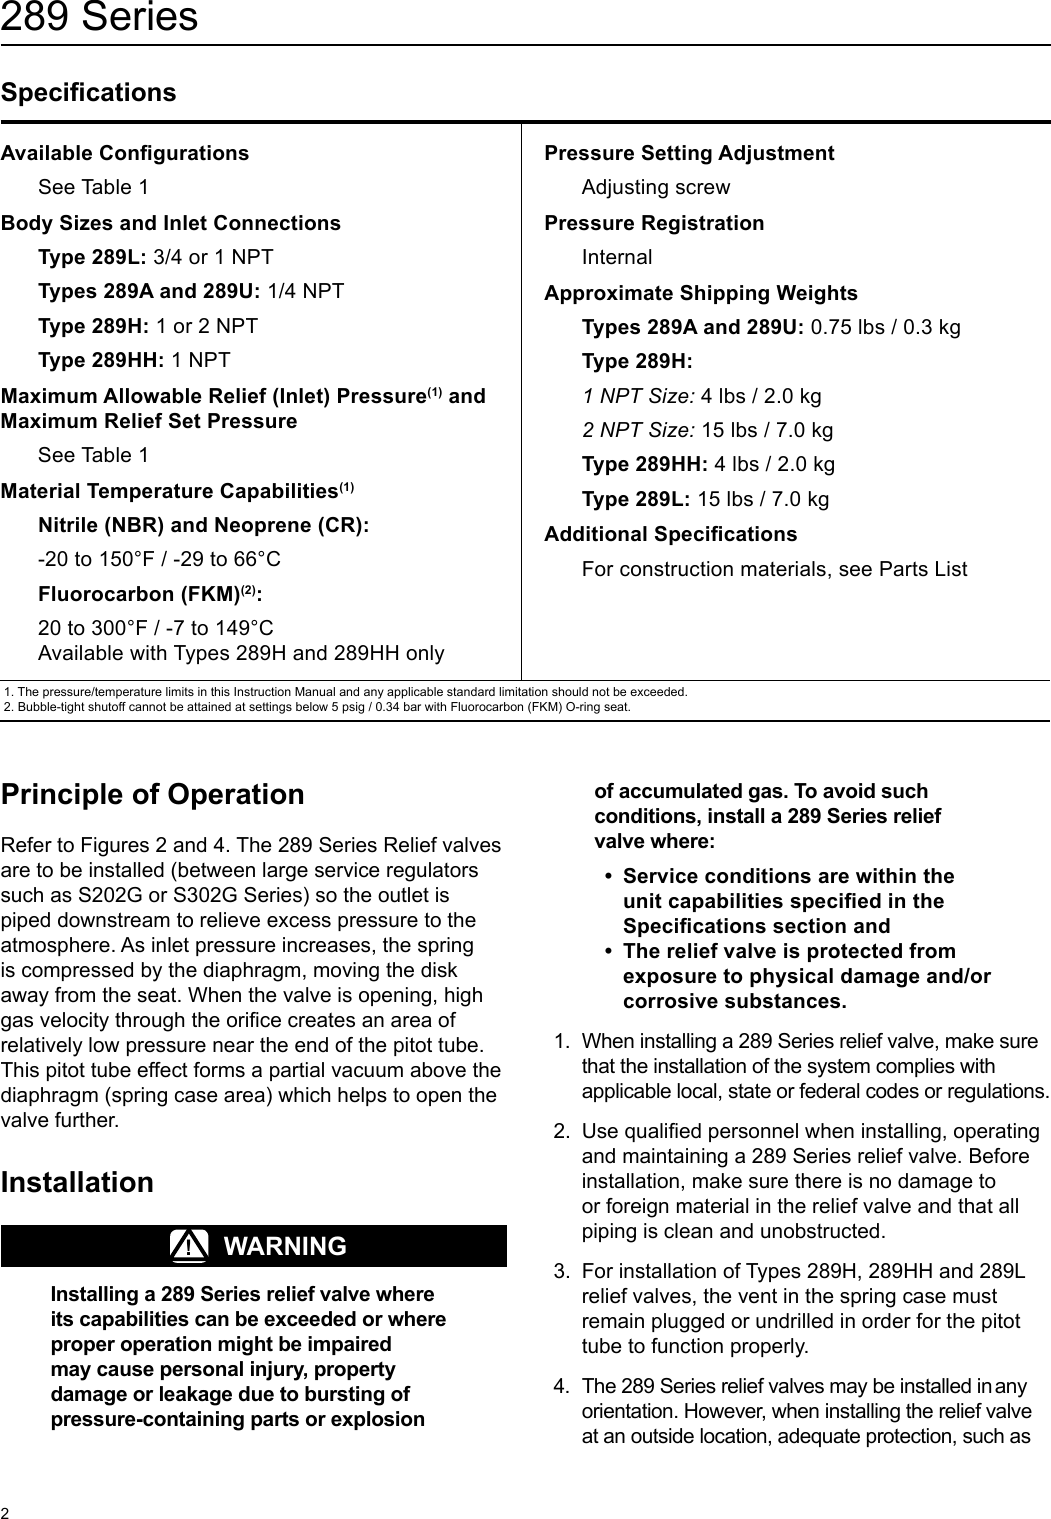 Page 2 of 12 - Emerson Emerson-289-Series-Relief-Valves-Backpressure-Regulators-Instruction-Manual-  Emerson-289-series-relief-valves-backpressure-regulators-instruction-manual